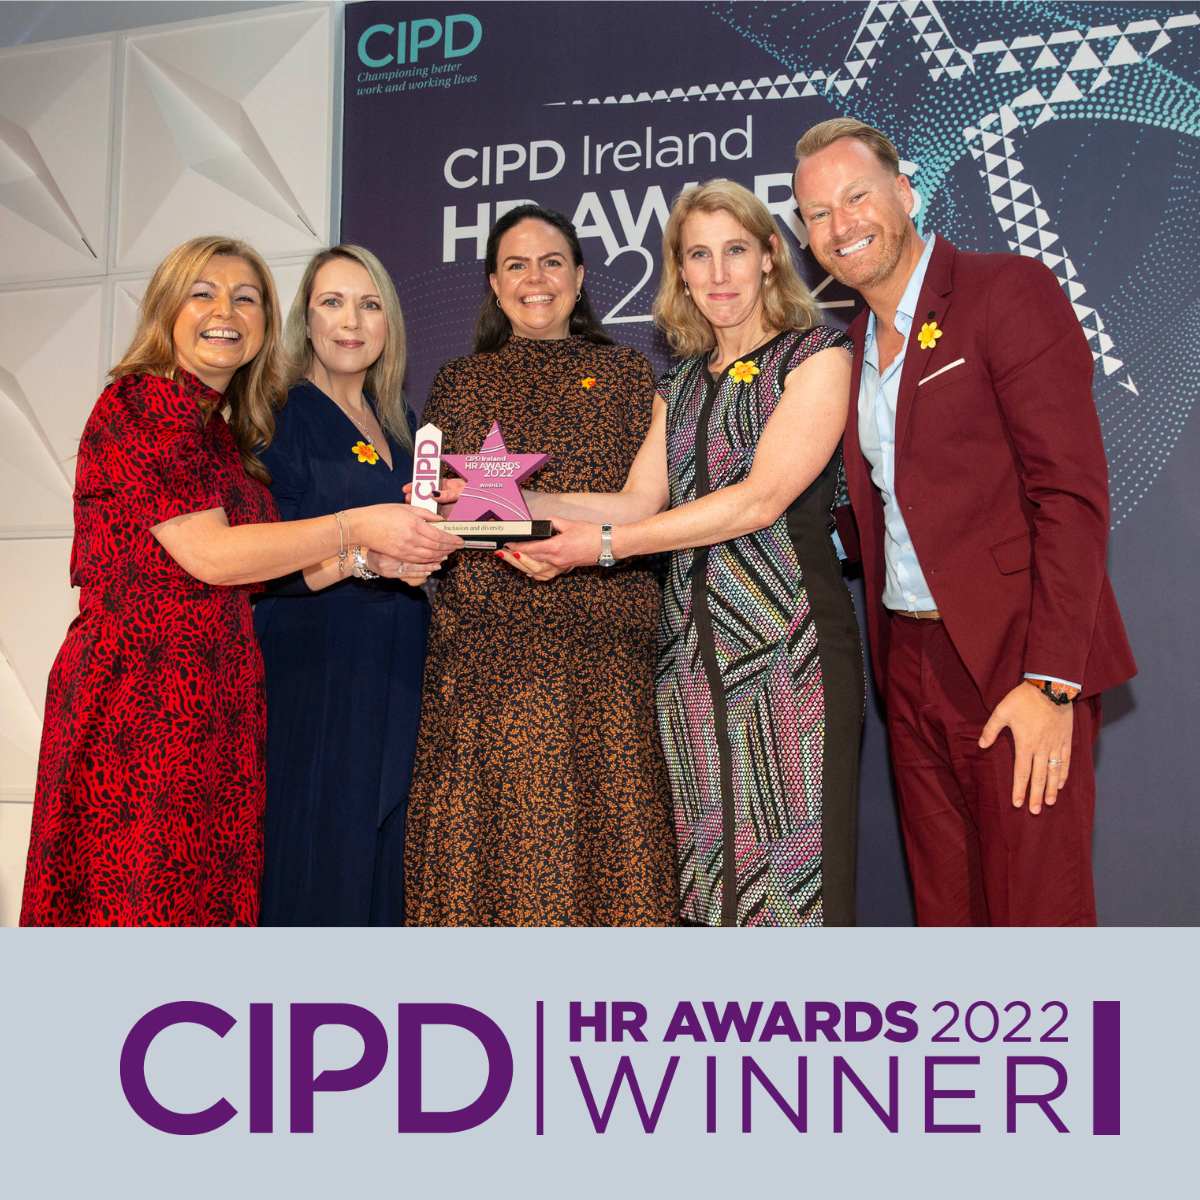 FINEOS Wins the Inclusion and Diversity Award from CIPD Ireland